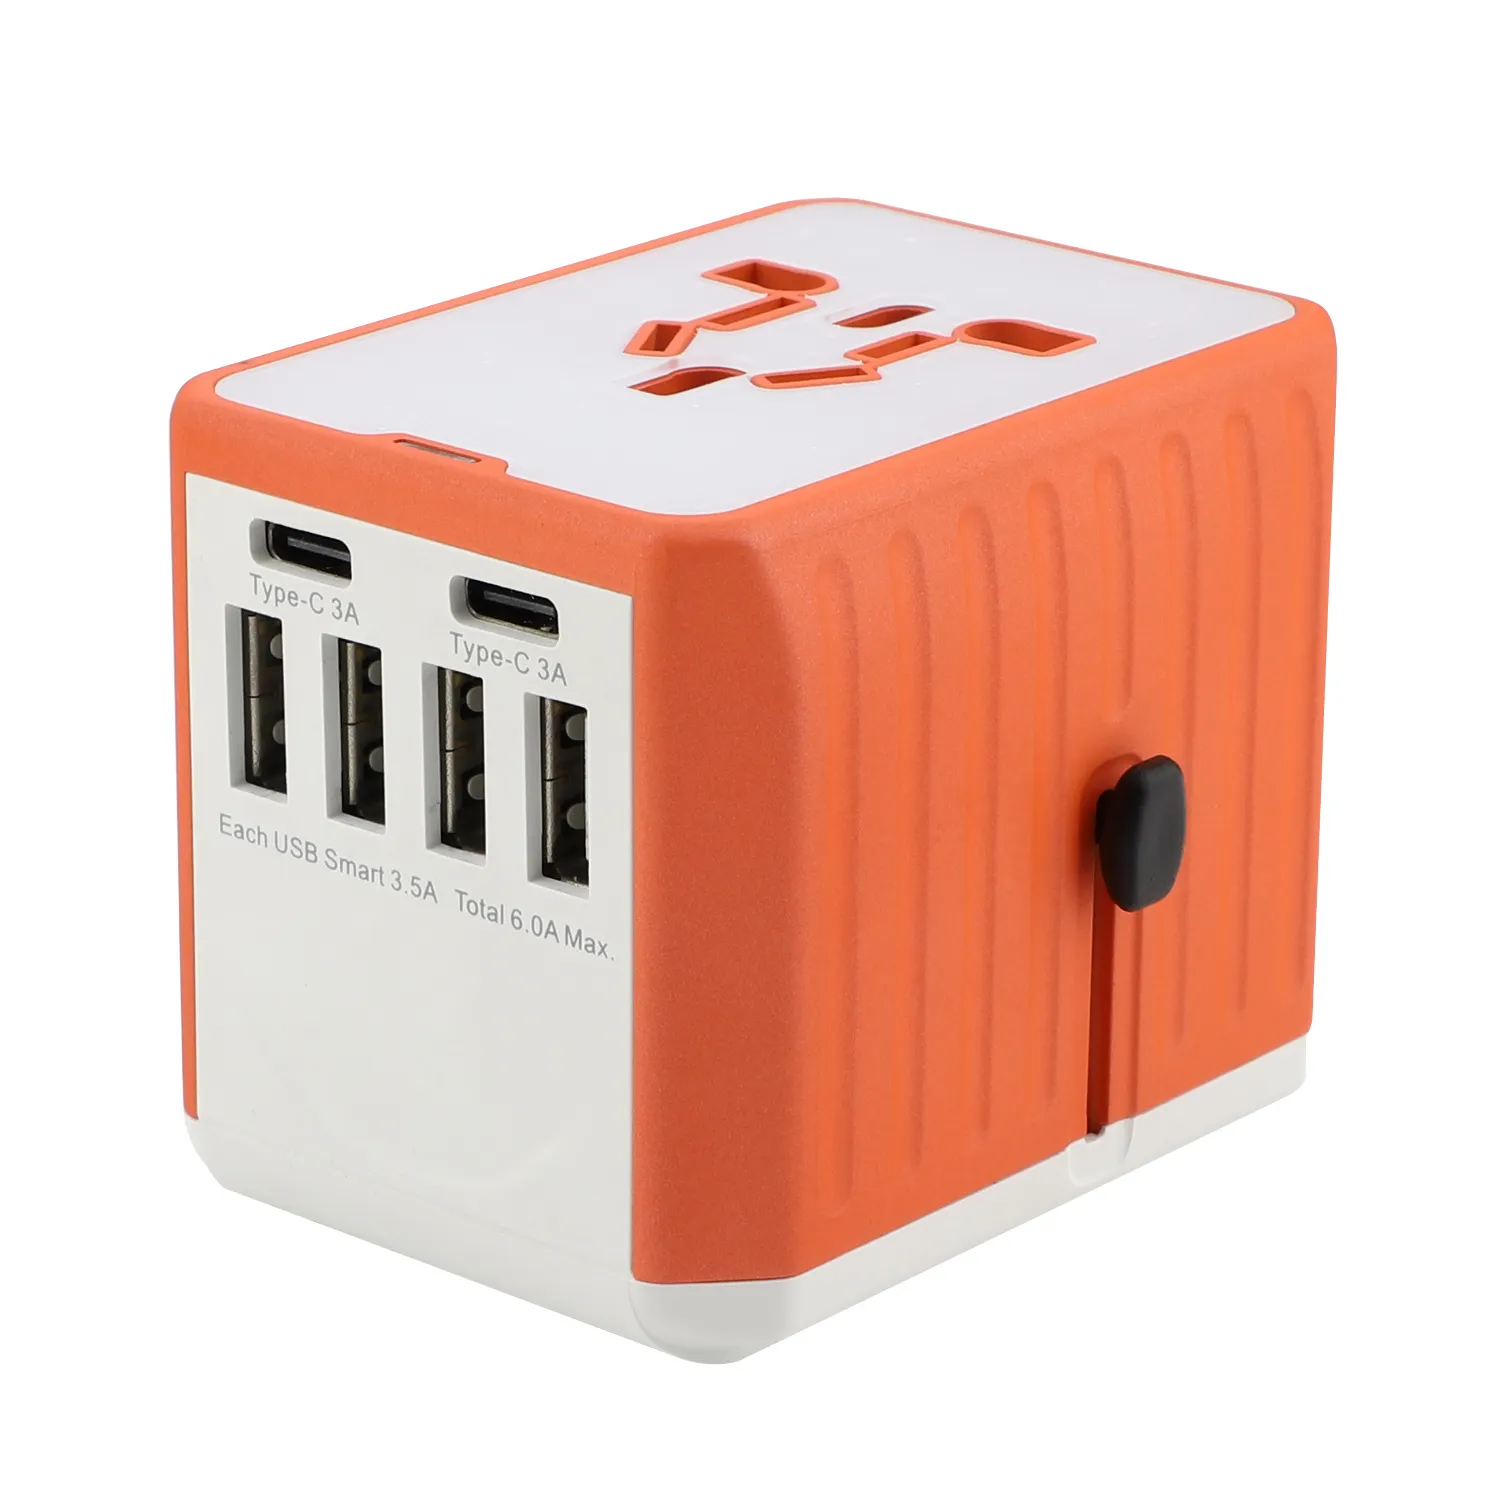 2020 new 110-250V US AUS UK EU plug mobile phone accessories 6USB charger 6A output universal travel adapter with 4USB 2Type-C